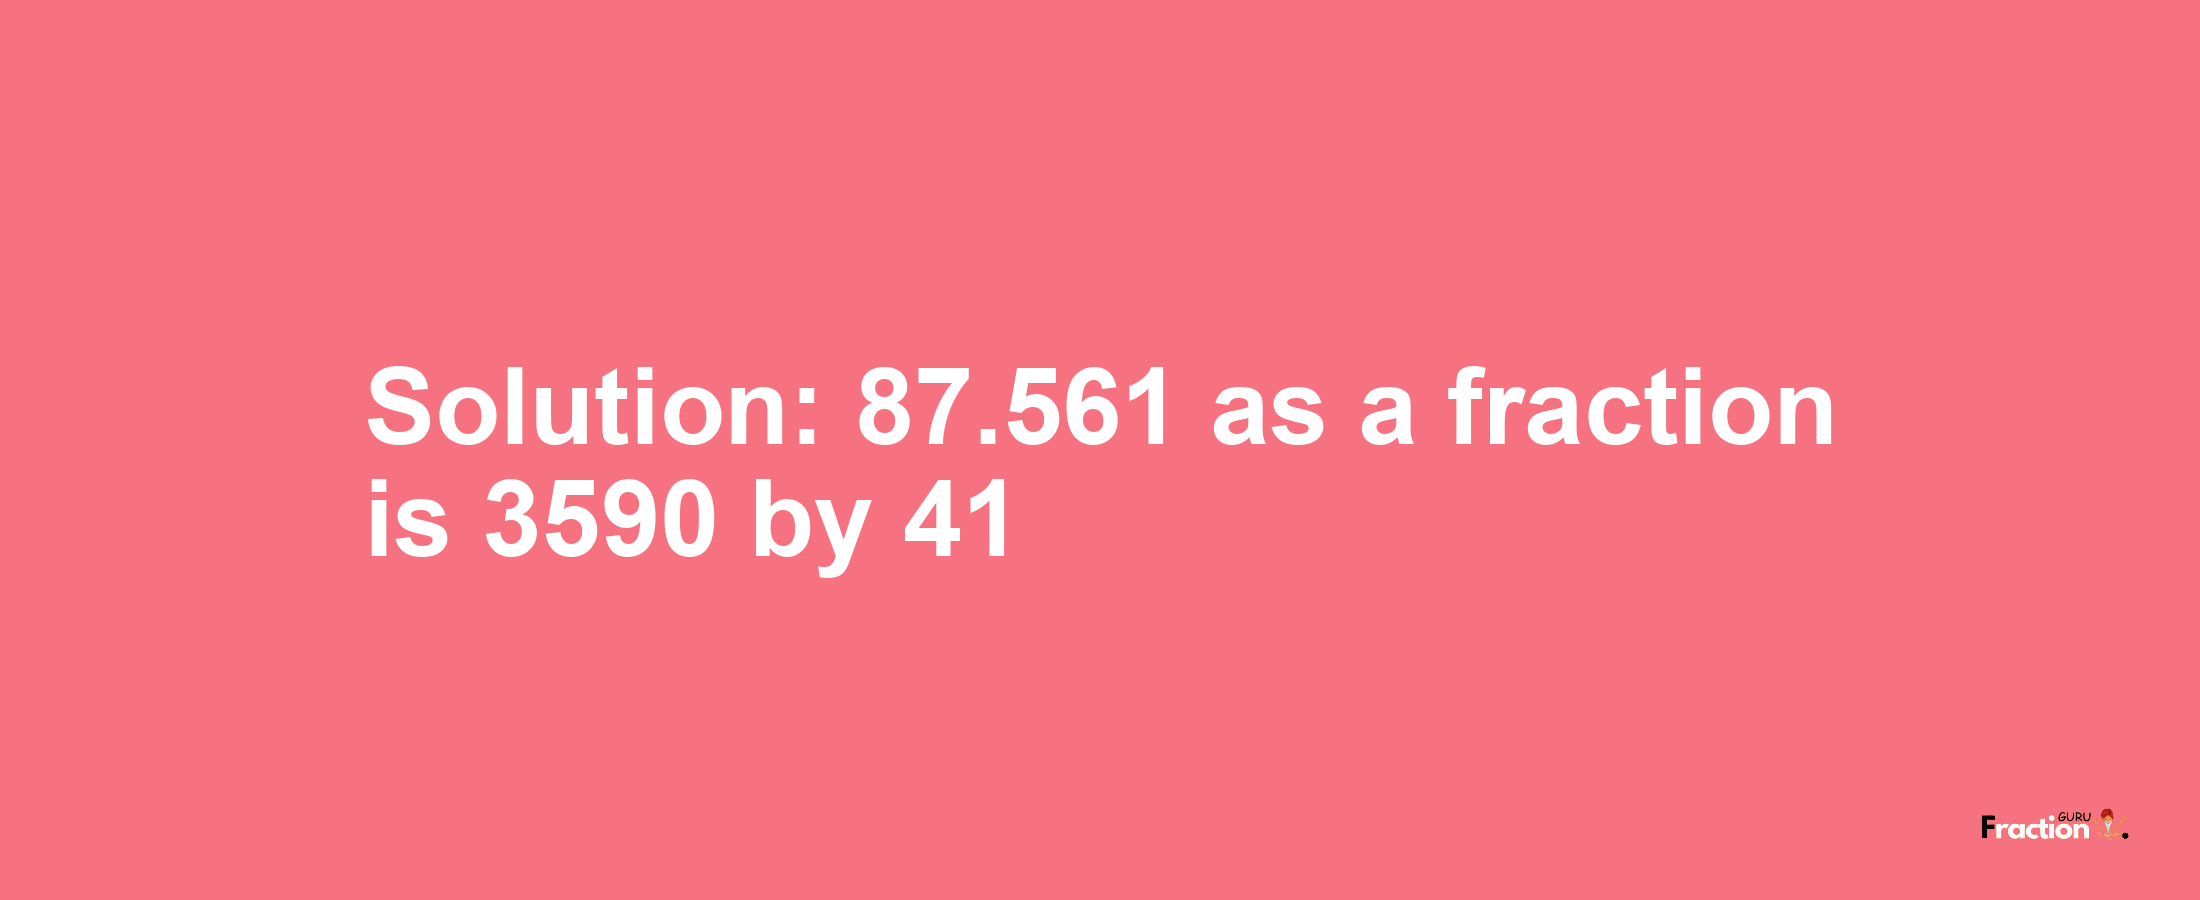 Solution:87.561 as a fraction is 3590/41